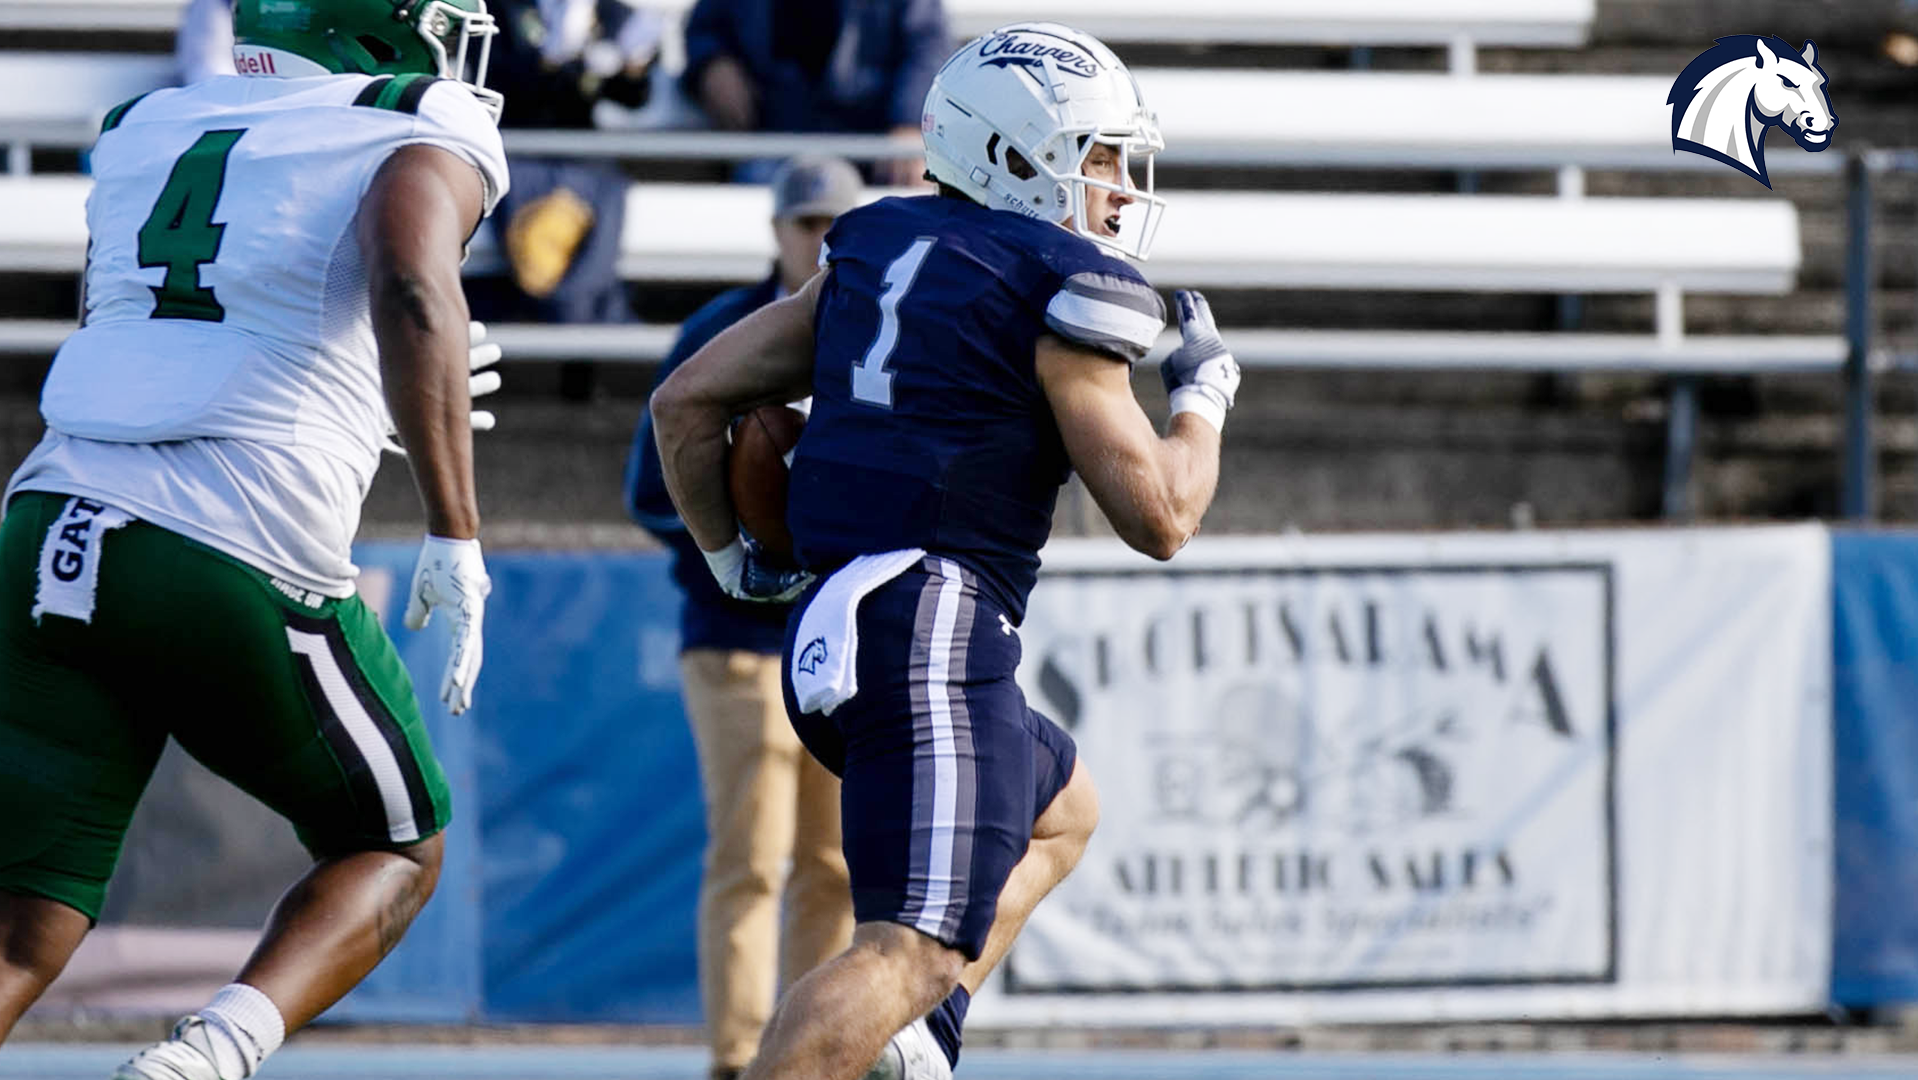 Hillsdale's Michael Herzog named first team All-American by the Don Hansen Football Committee